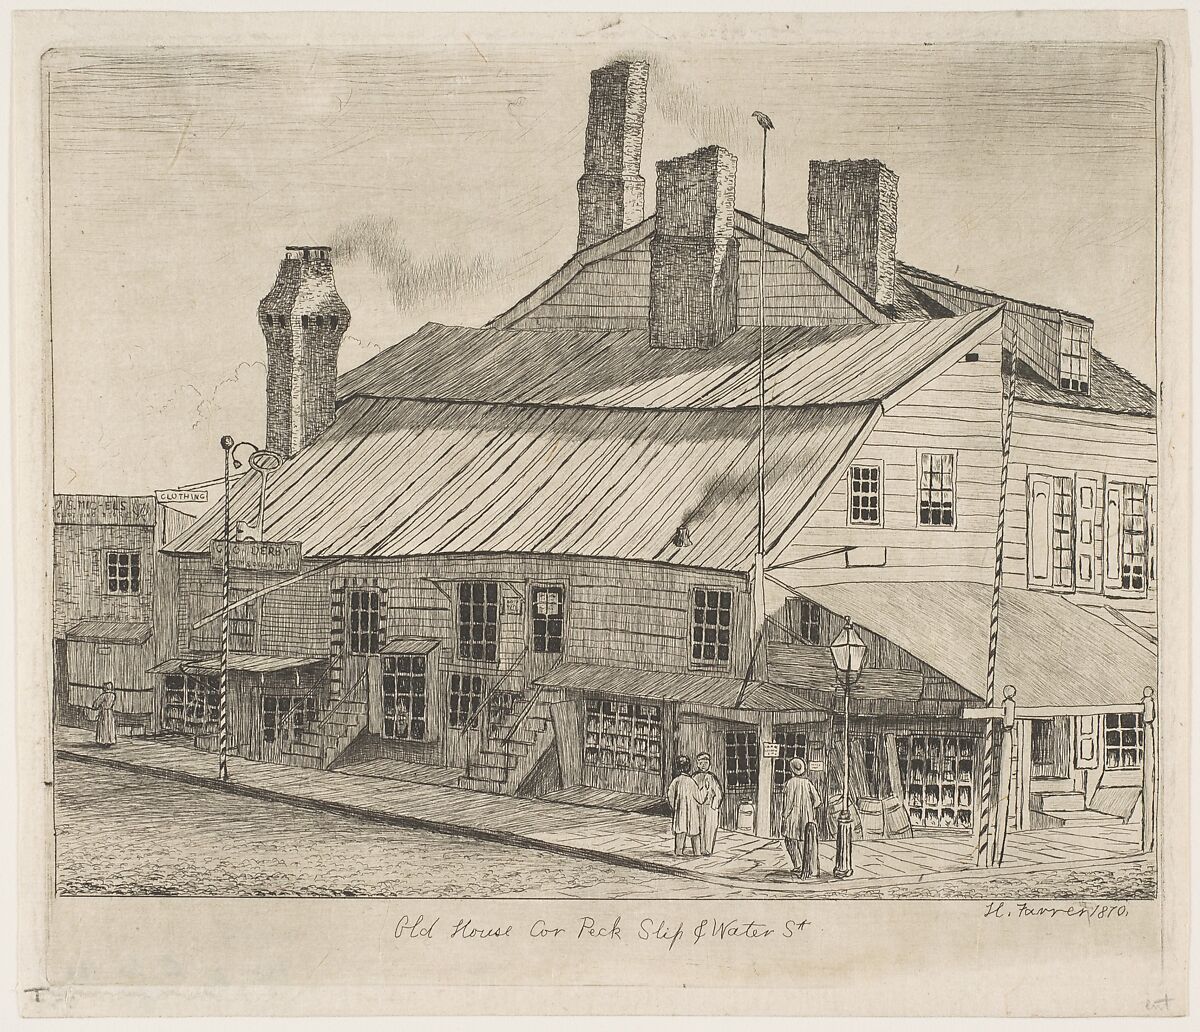 Old House, Corner of Peck Slip and Water Street, from "Scenes of Old New York", Henry Farrer (American, London 1844–1903 New York), Etching 